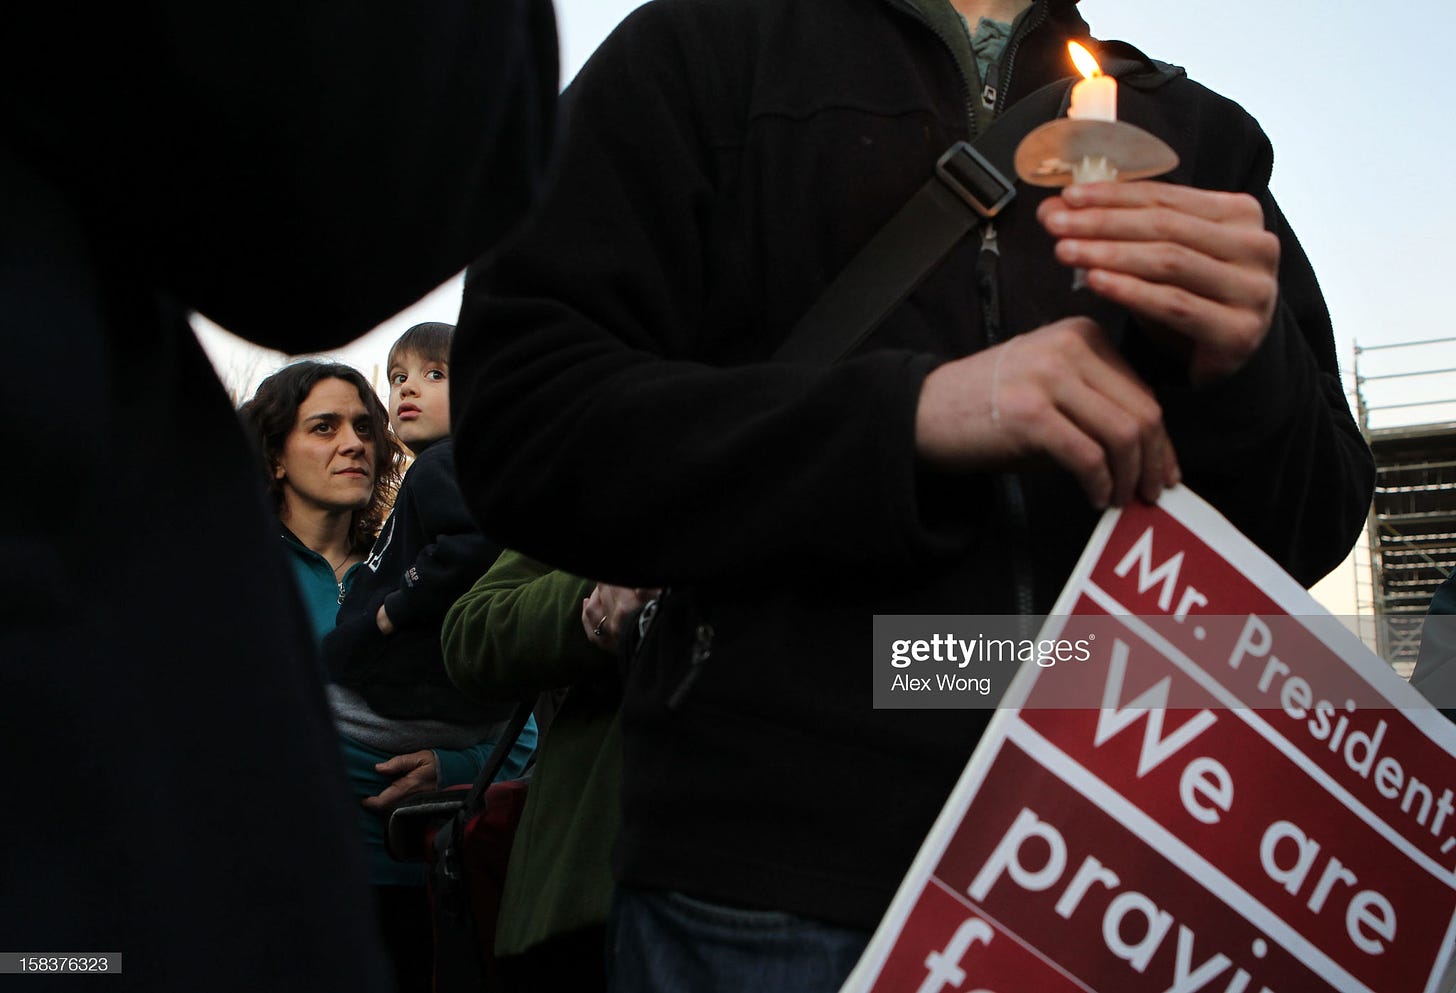 Candle Light Vigil Held At White House For Victims Of Elementary School Shooting : News Photo